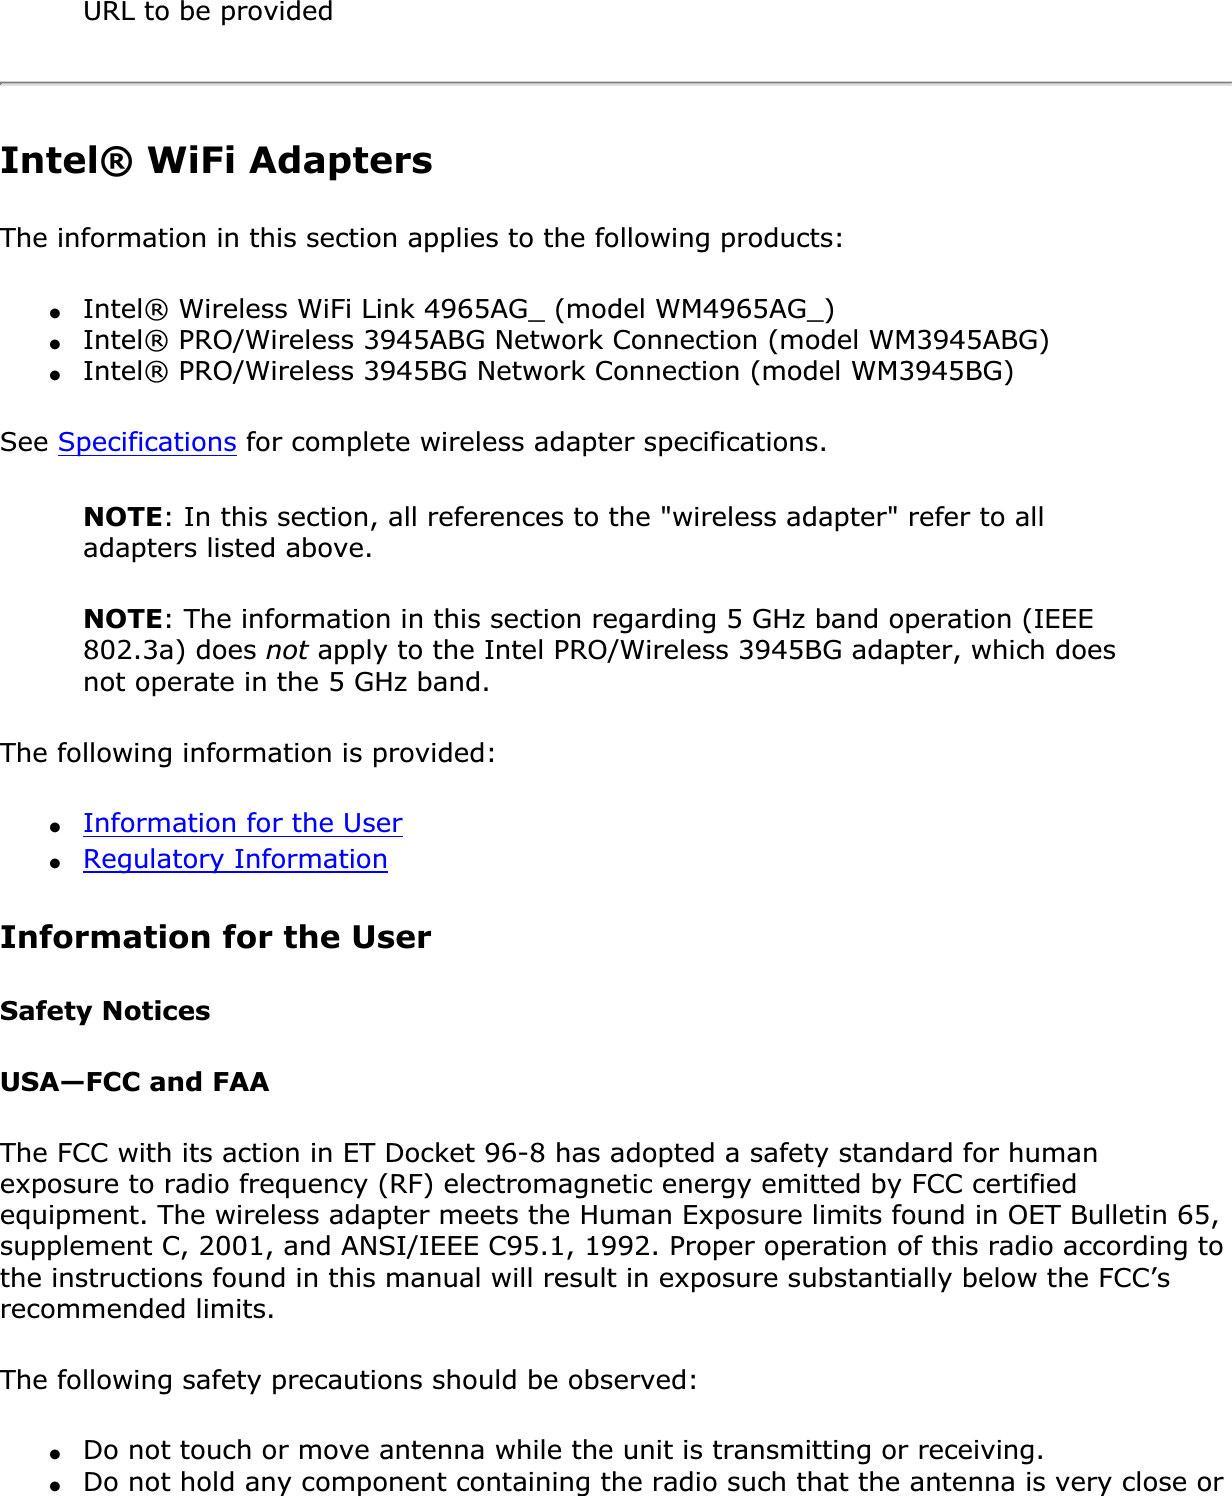 URL to be providedIntel® WiFi AdaptersThe information in this section applies to the following products:●Intel® Wireless WiFi Link 4965AG_ (model WM4965AG_)●Intel® PRO/Wireless 3945ABG Network Connection (model WM3945ABG)●Intel® PRO/Wireless 3945BG Network Connection (model WM3945BG)See Specifications for complete wireless adapter specifications.NOTE: In this section, all references to the &quot;wireless adapter&quot; refer to all adapters listed above.NOTE: The information in this section regarding 5 GHz band operation (IEEE 802.3a) does not apply to the Intel PRO/Wireless 3945BG adapter, which does not operate in the 5 GHz band.The following information is provided: ●Information for the User●Regulatory InformationInformation for the UserSafety NoticesUSA—FCC and FAAThe FCC with its action in ET Docket 96-8 has adopted a safety standard for human exposure to radio frequency (RF) electromagnetic energy emitted by FCC certified equipment. The wireless adapter meets the Human Exposure limits found in OET Bulletin 65, supplement C, 2001, and ANSI/IEEE C95.1, 1992. Proper operation of this radio according to the instructions found in this manual will result in exposure substantially below the FCC’s recommended limits.The following safety precautions should be observed:●Do not touch or move antenna while the unit is transmitting or receiving.●Do not hold any component containing the radio such that the antenna is very close or 